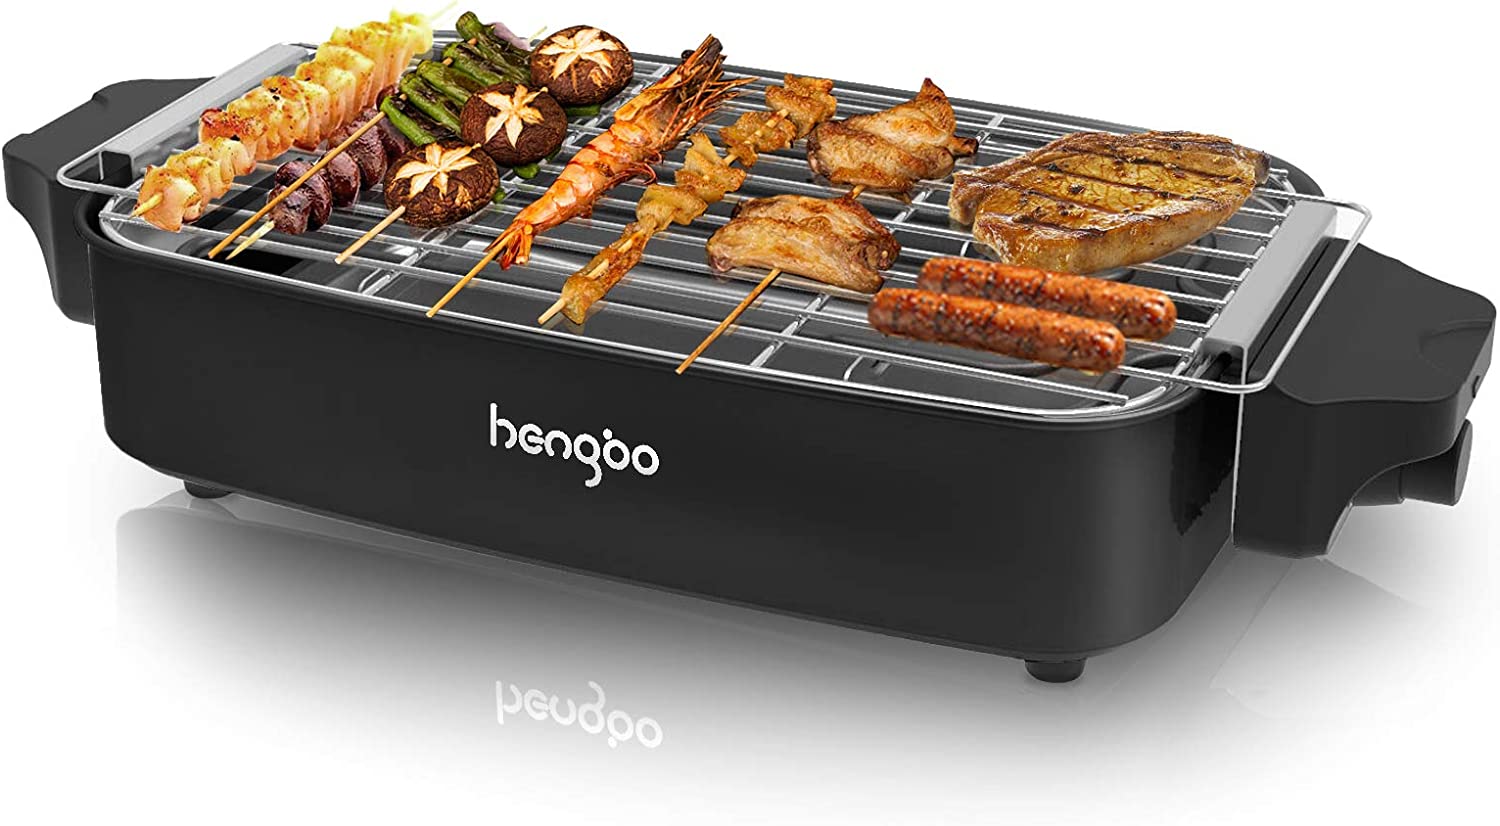 HengBO Tabletop 1800 W Electric Grill / BBQ, Smokeless Barbecue / Grill with Metal Drip Trays for the Balcony & Indoor Parties, Black / Orange / Blue